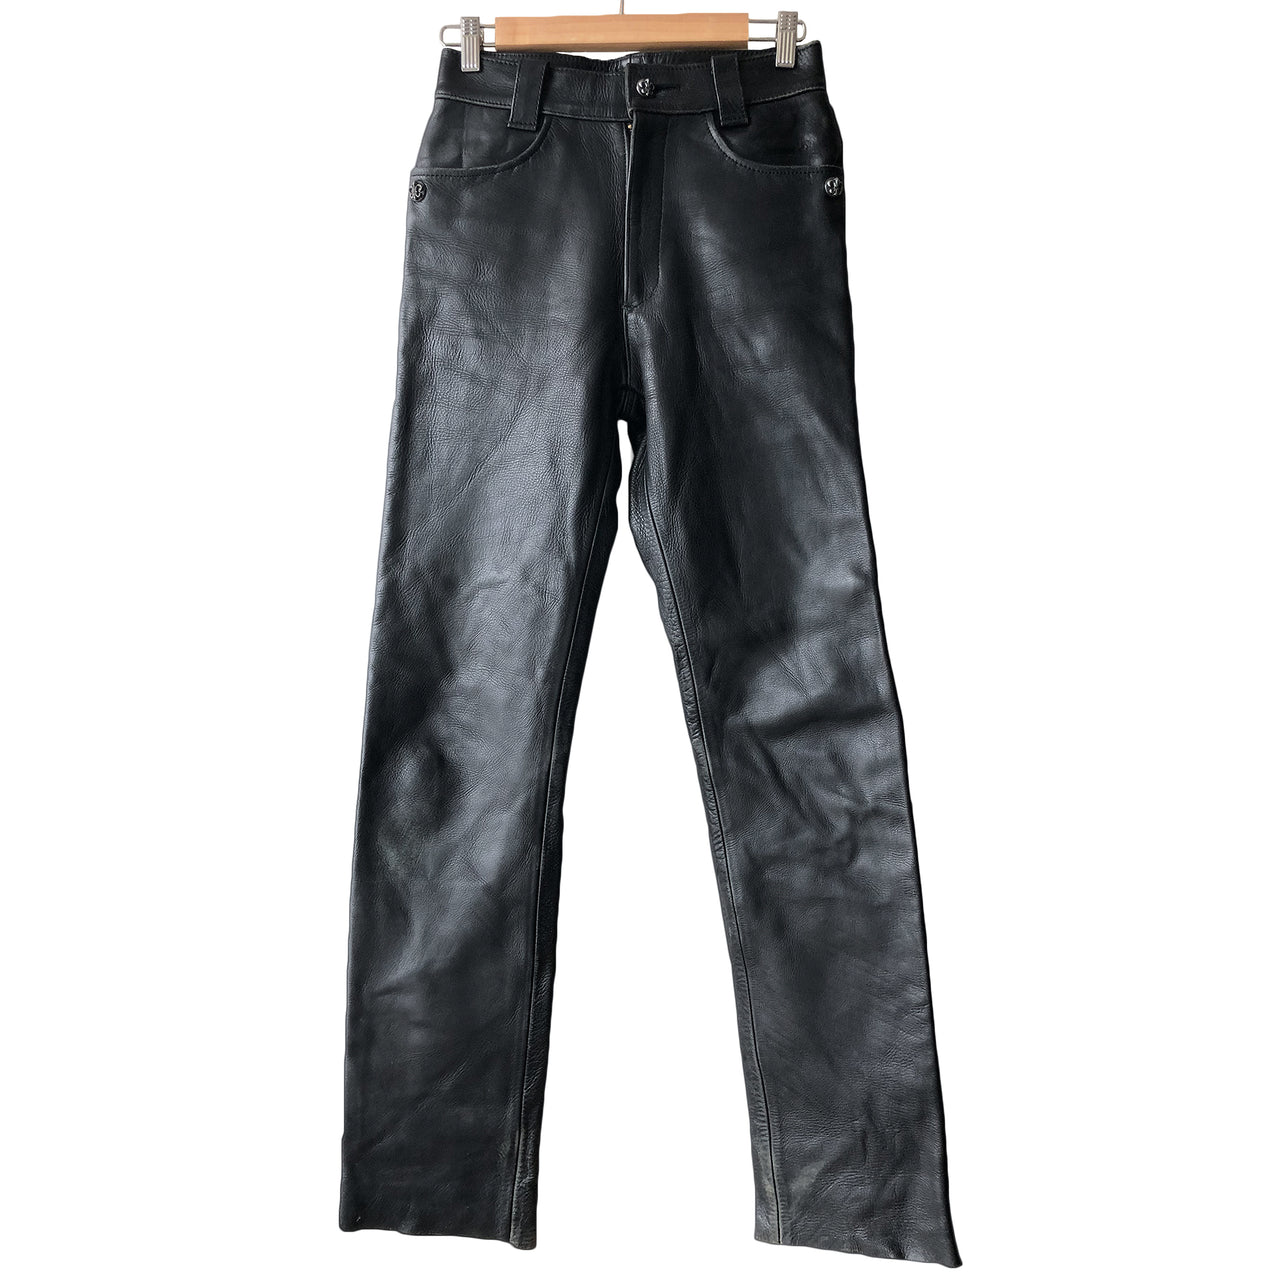 Black Leather Rider's Trouser